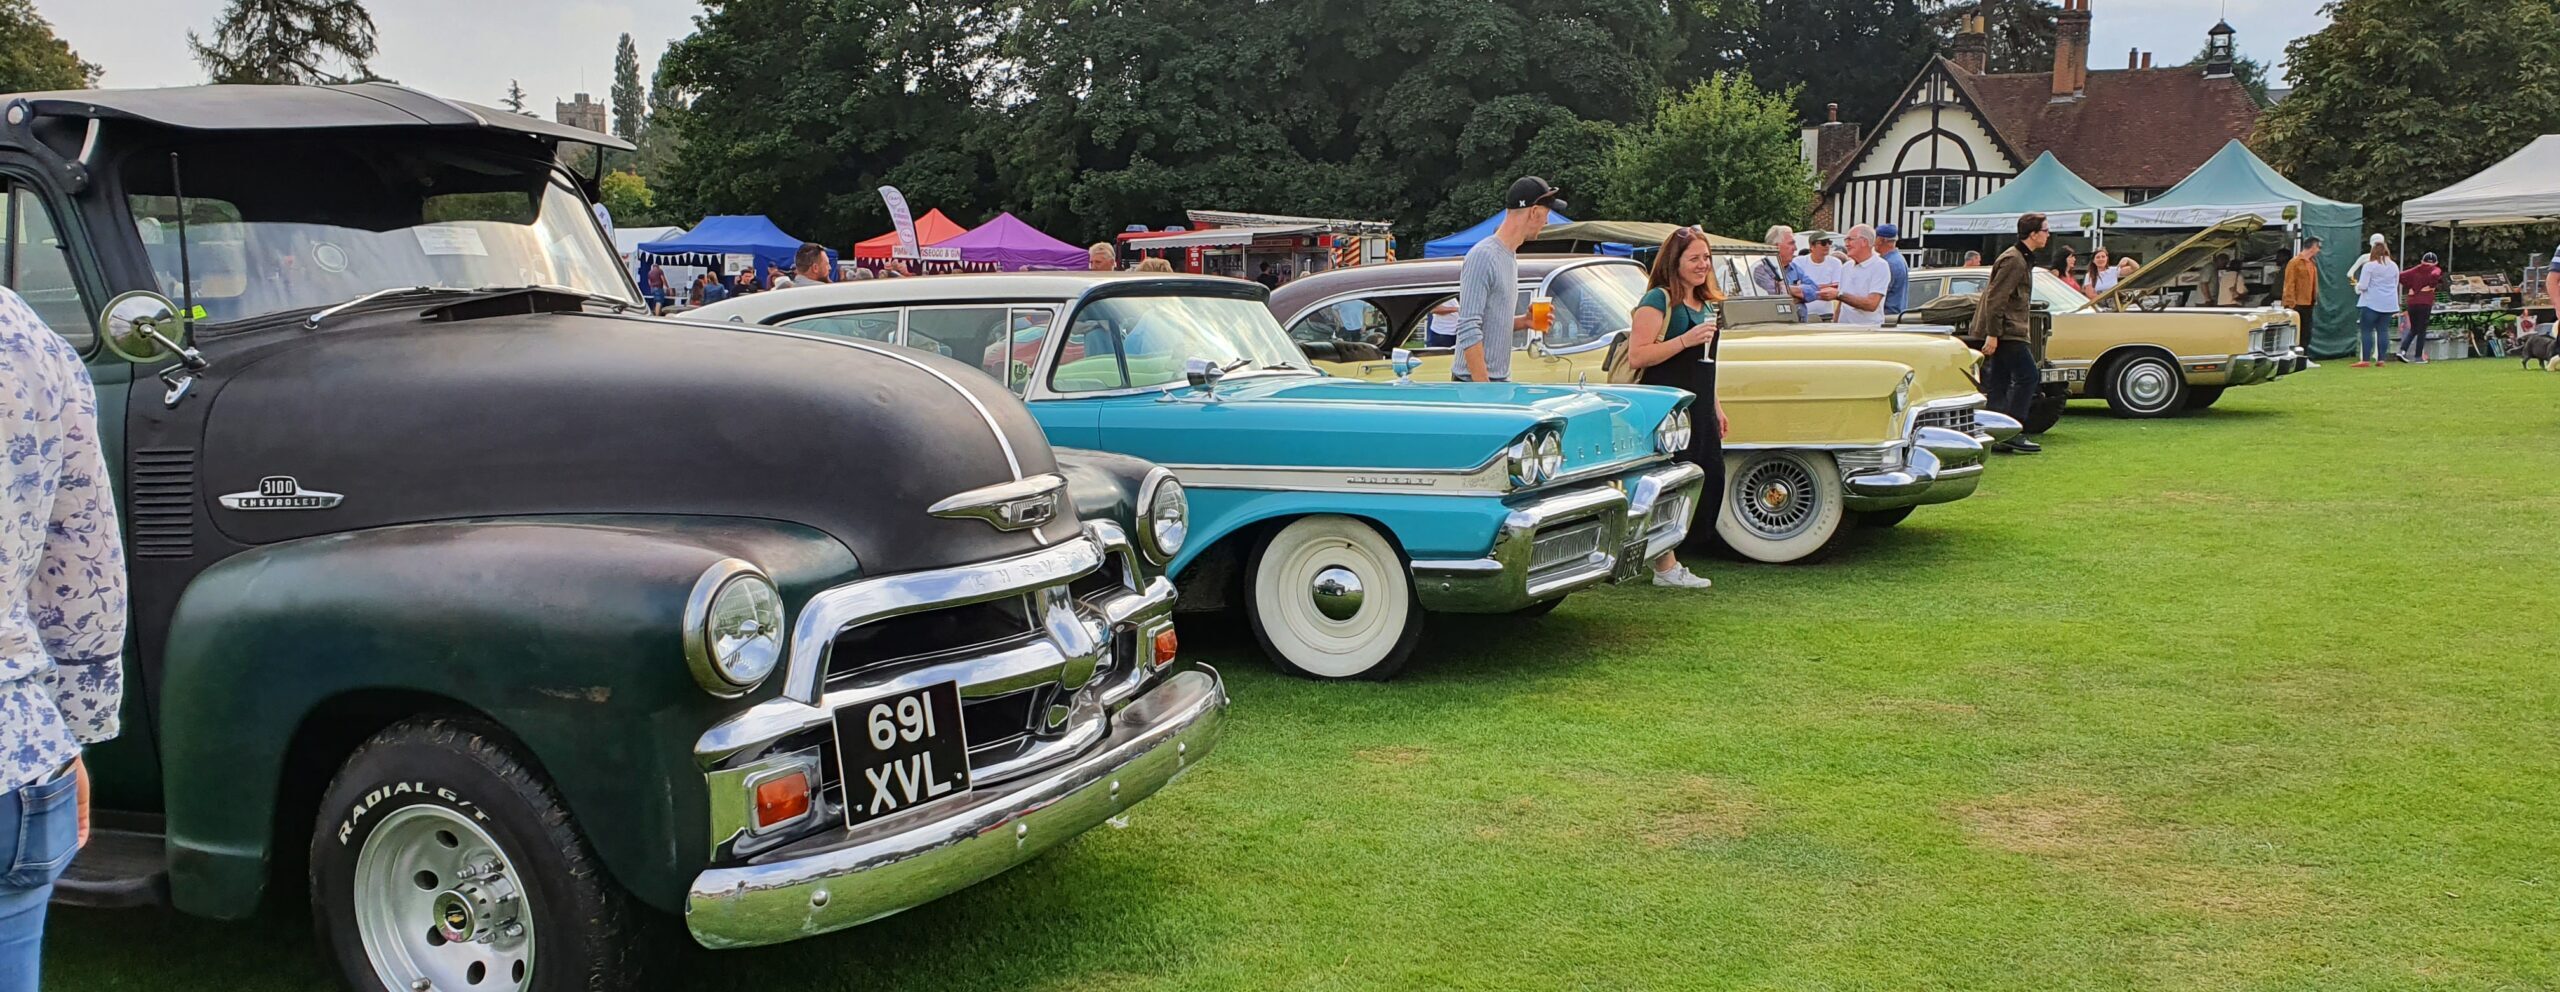 Classic Cars & Retro Vintage on the Green 2021